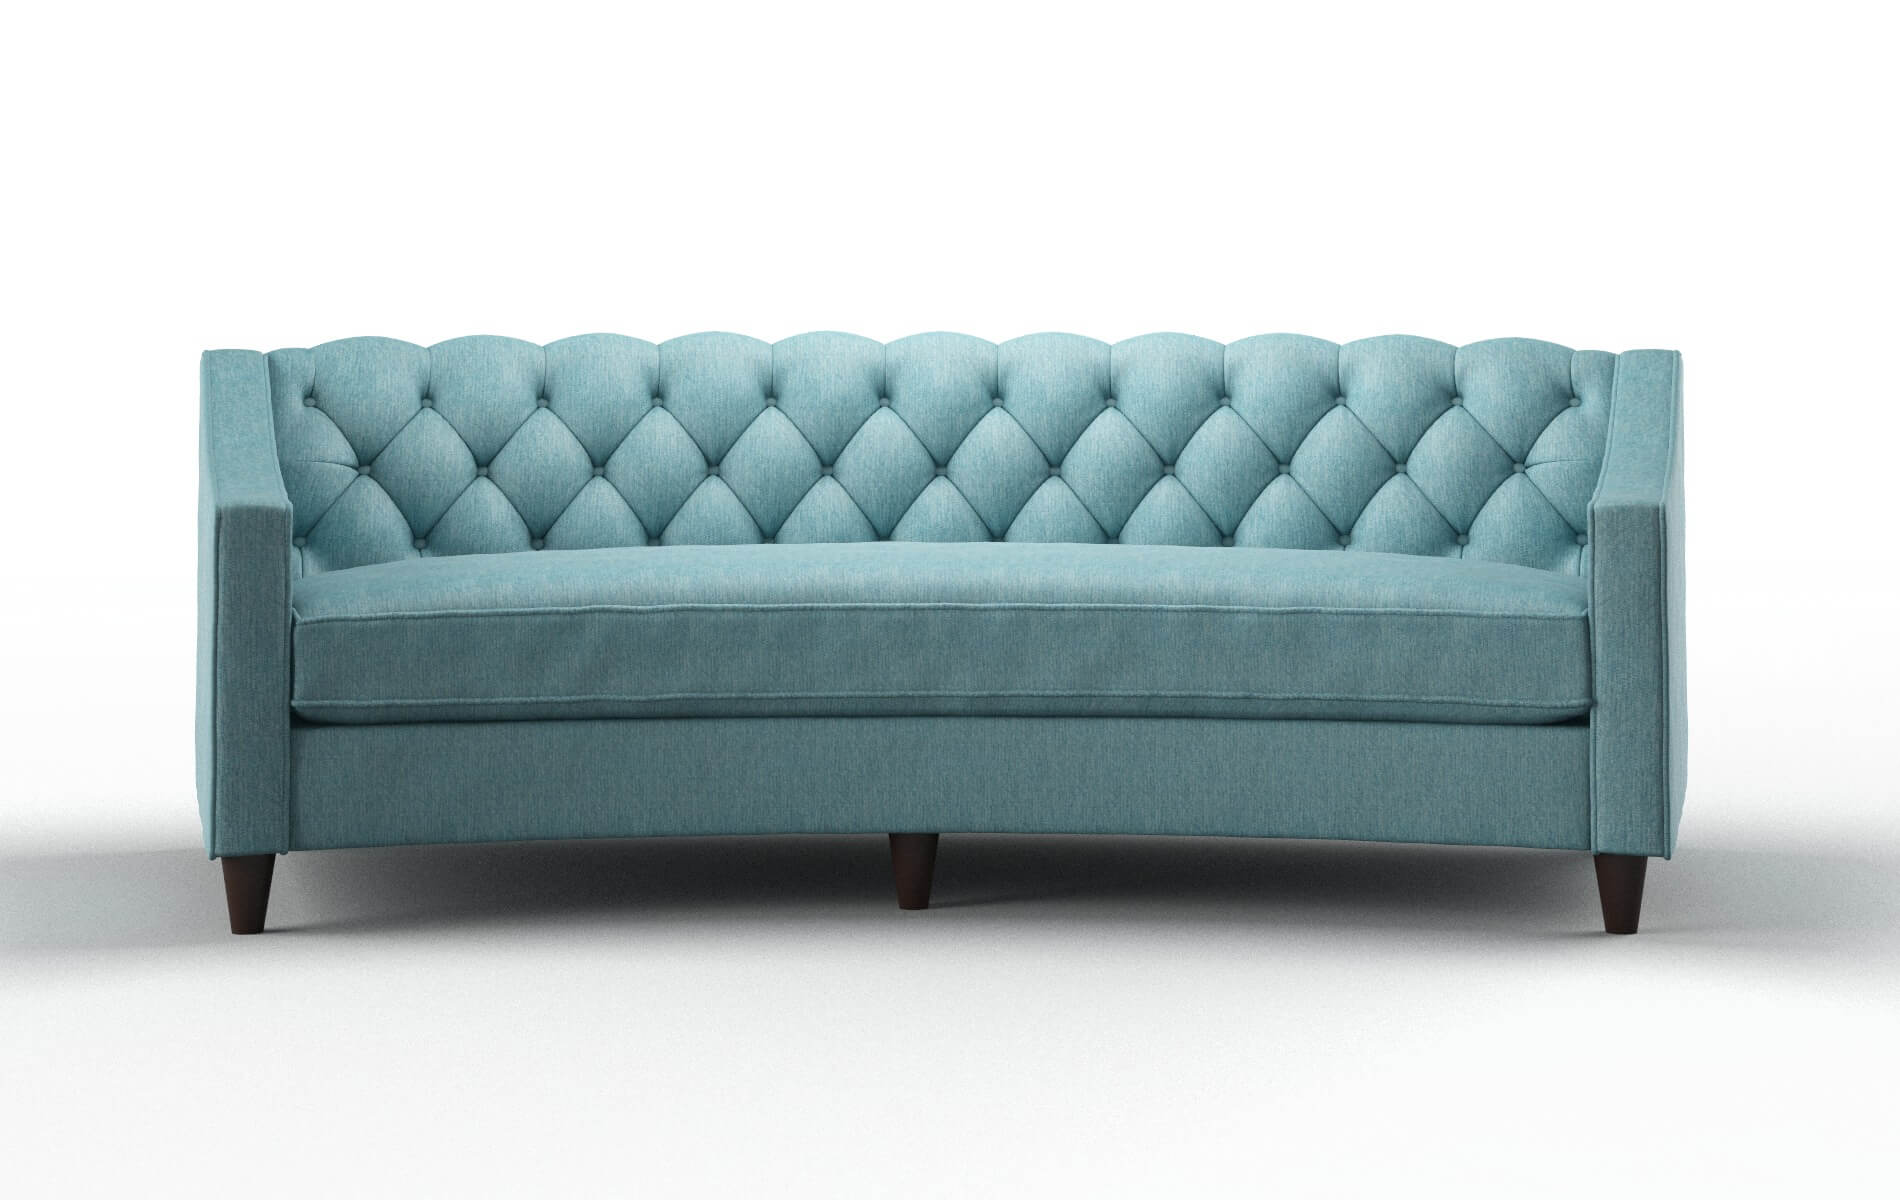 Manchester Cosmo Turquoise chair espresso legs